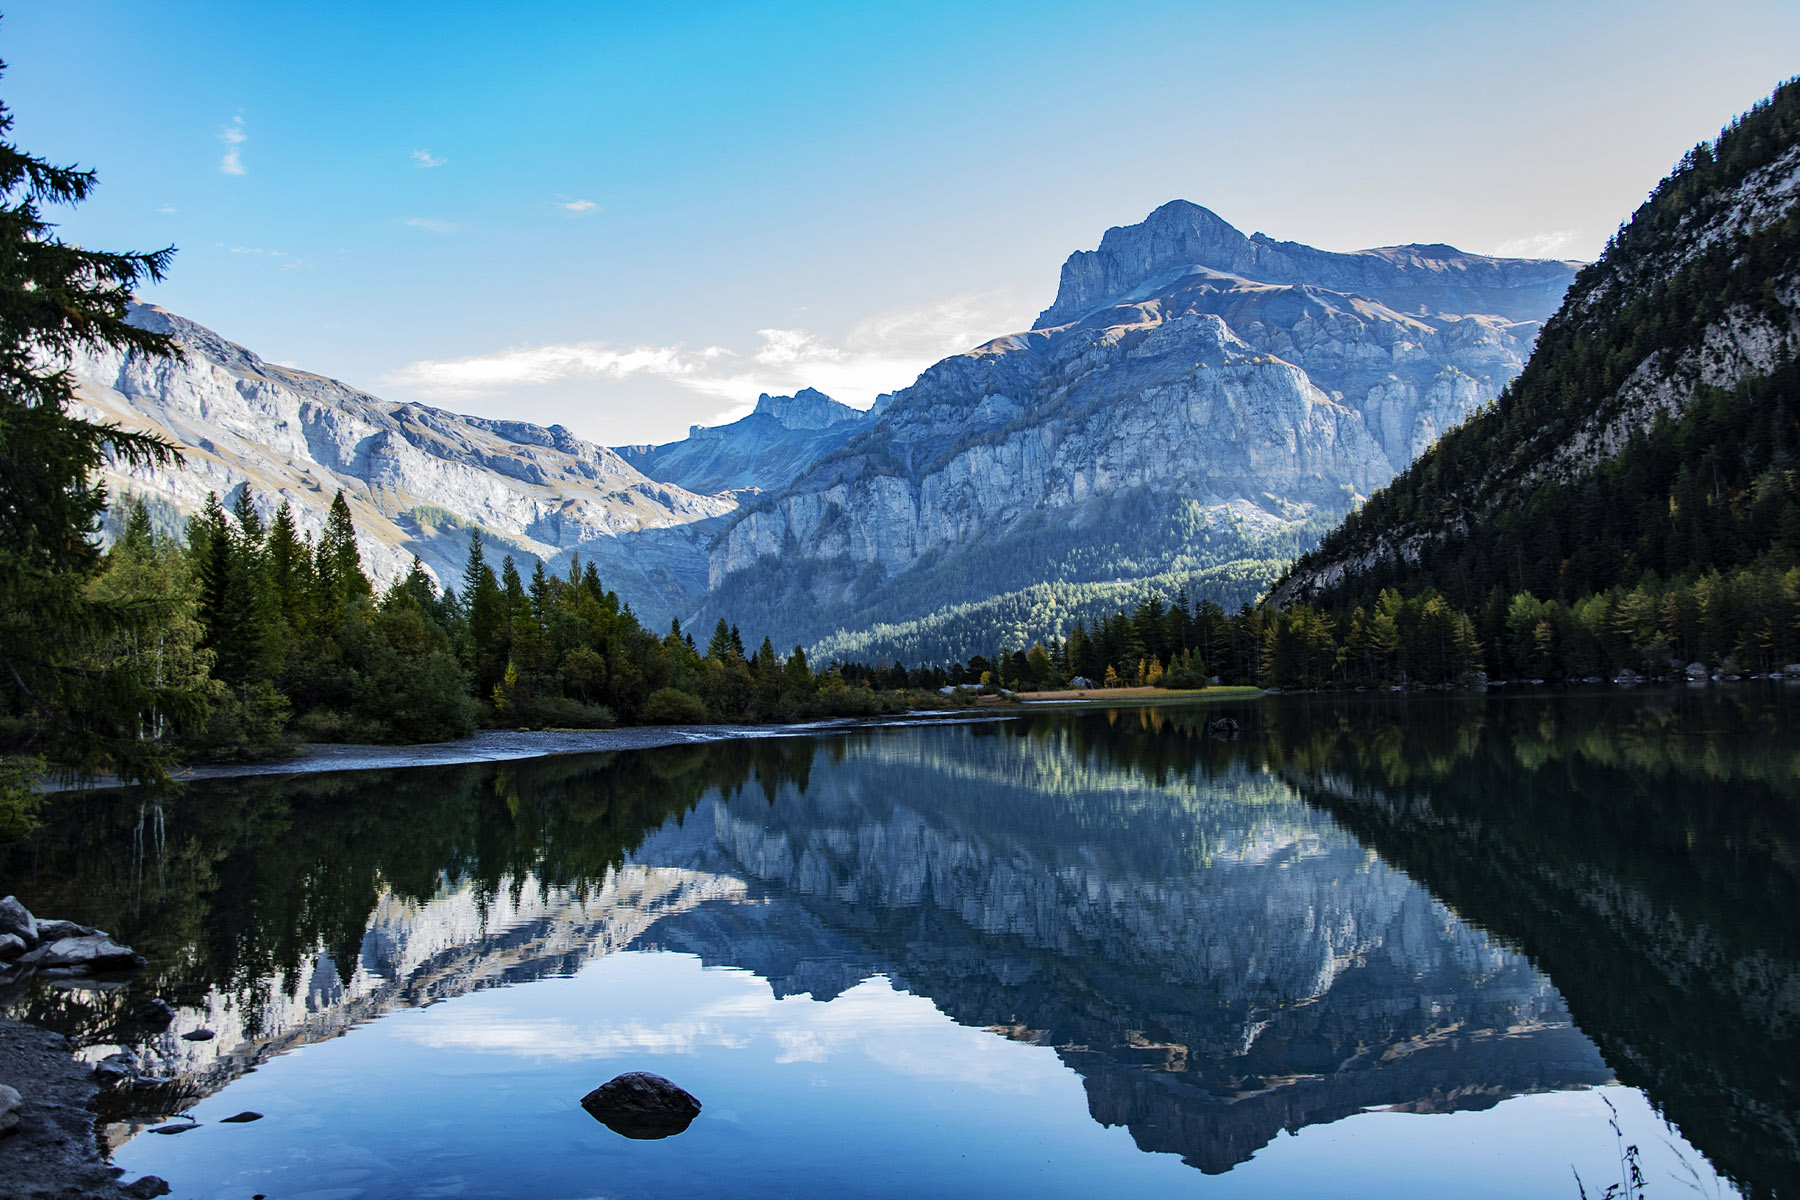 A photo of the spectacular Swiss Alps reflected in a body of water, with trees on either side.